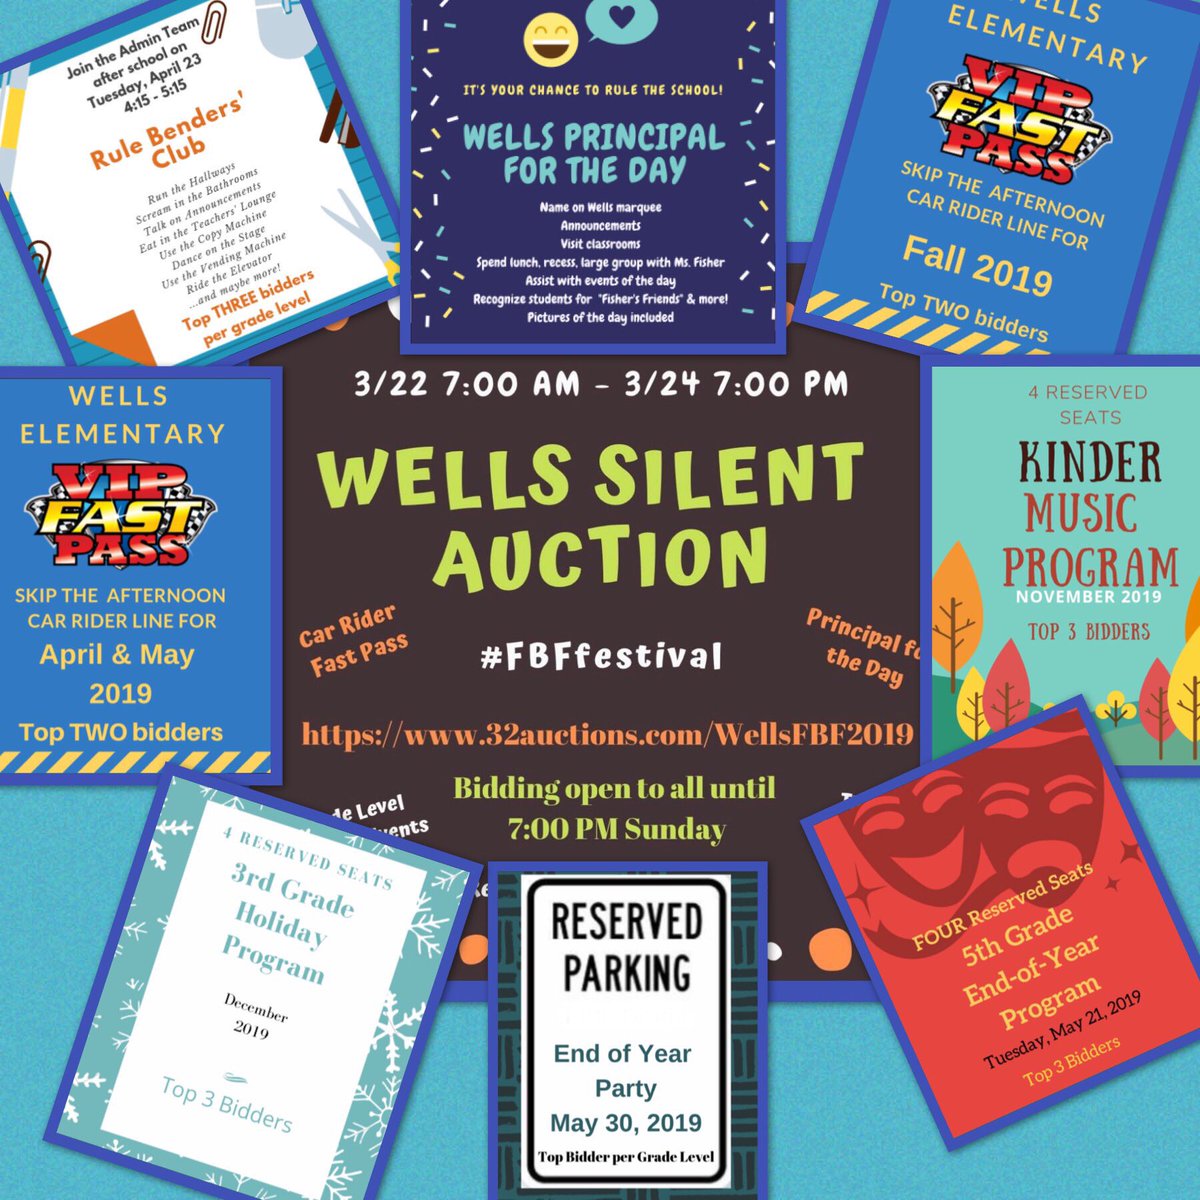 Our @CFISDWells silent auction is going on now. Log on to 32auctions.com/WellsFBF2019. Bid on a day with the principal, fun with the admin team, reserved seating at programs, reserved parking for end of year party & fast pass through the car rider line. #ExploreWells #FBFfestival